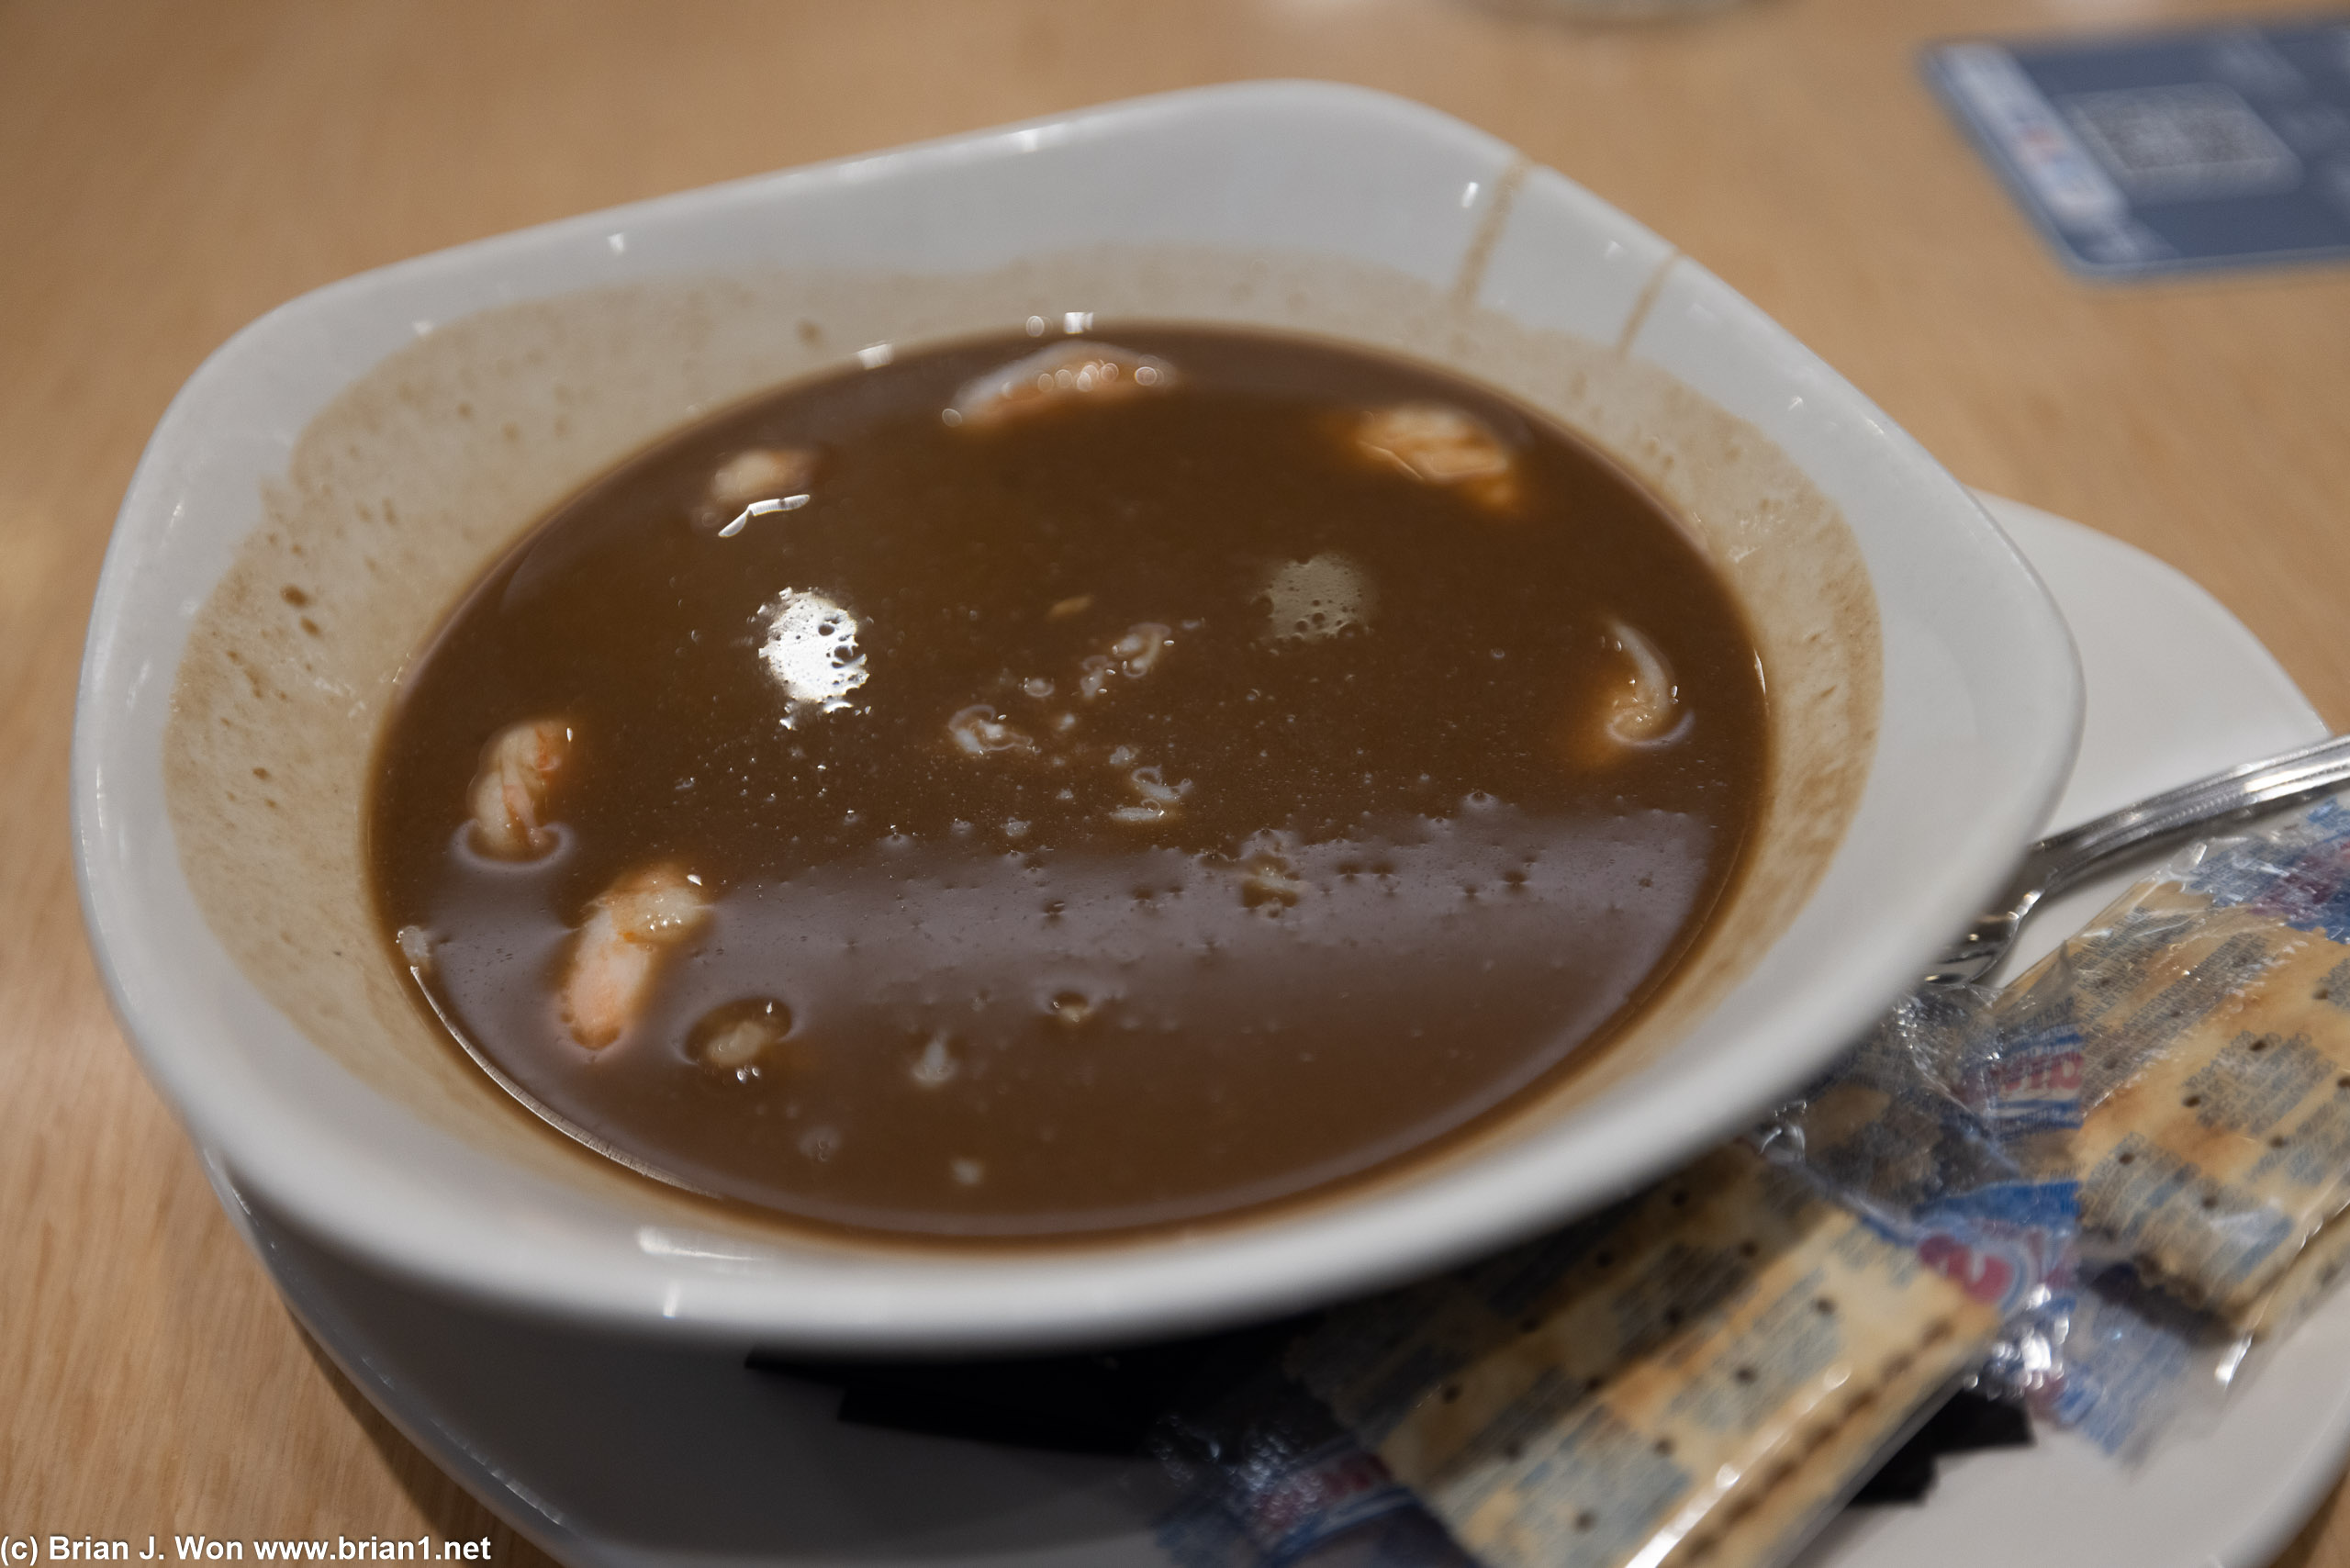 The gumbo at Landry's Seafood at IAH was straight up awful.